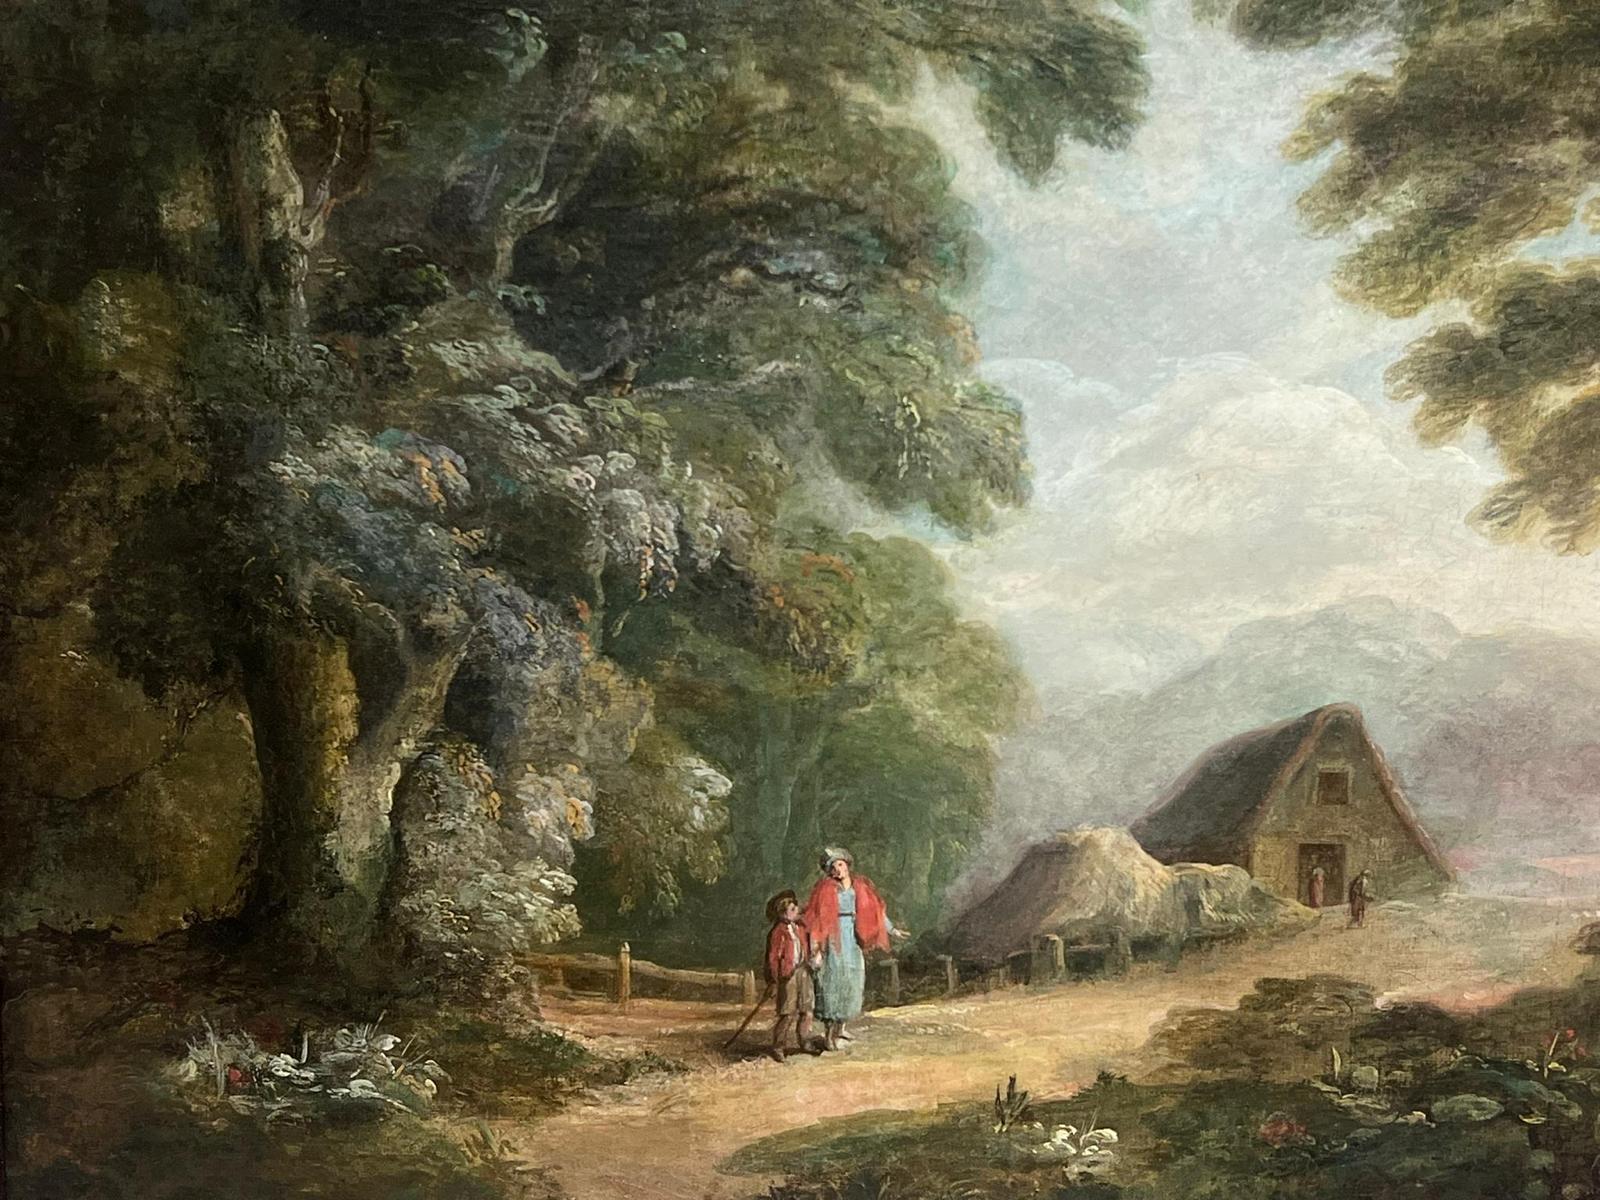 Wooded Landscape with Figures
by Thomas Barker of Bath (British 1769-1847)
oil on canvas, framed
framed: 22.5 x 26 inches
canvas: 14 x 17.5 inches
inscribed verso
provenance: private collection, England
condition: very good and sound condition